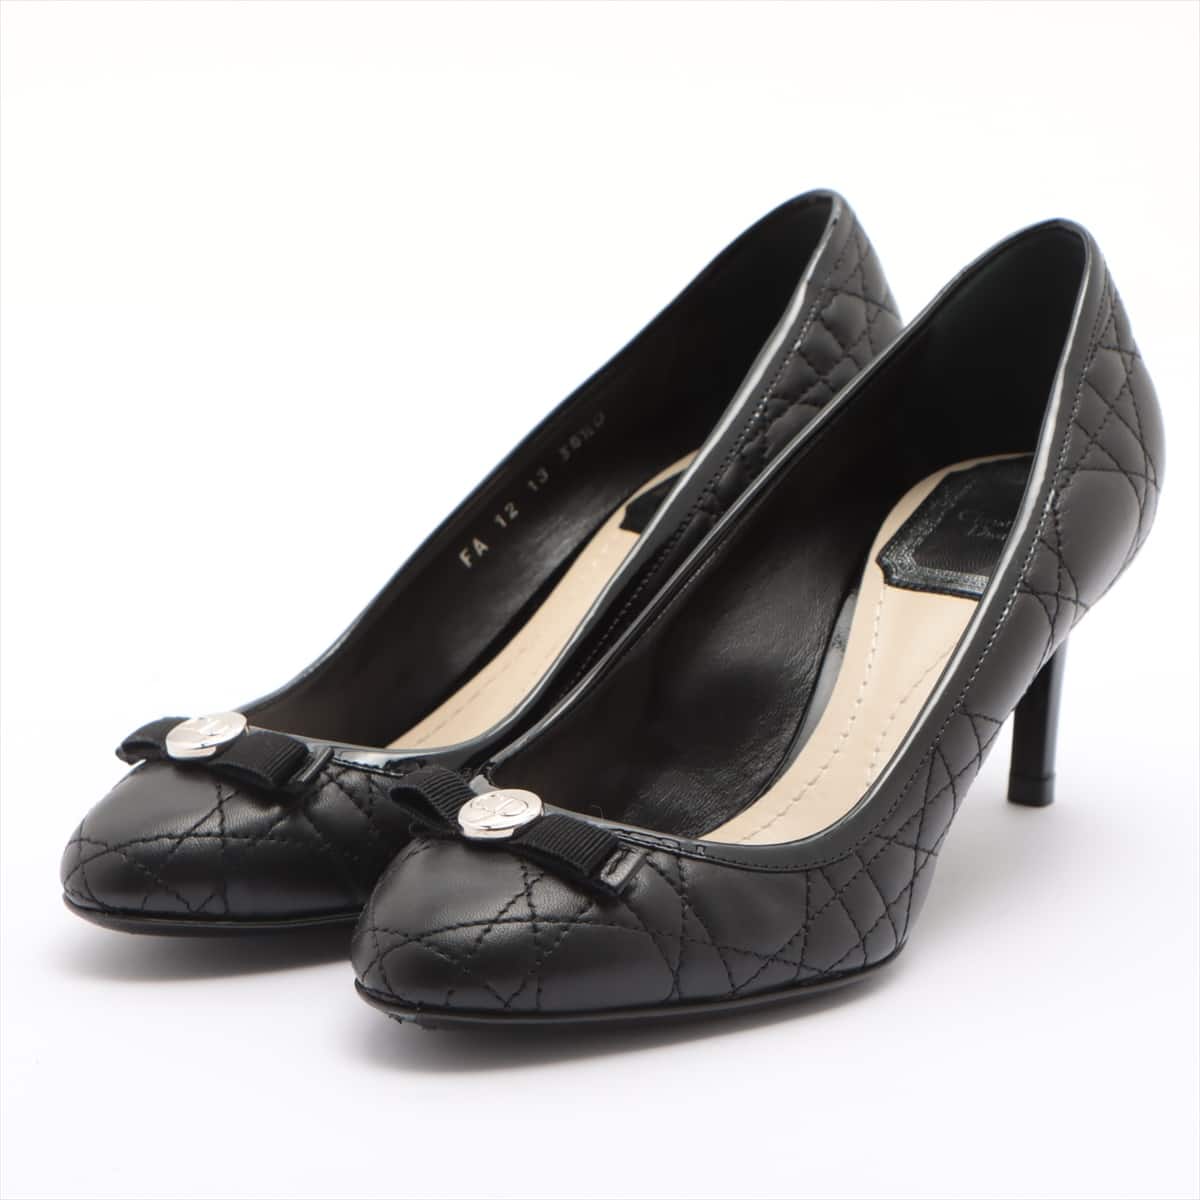 Christian Dior Cannage Leather Pumps 35 1/2 Ladies' Black